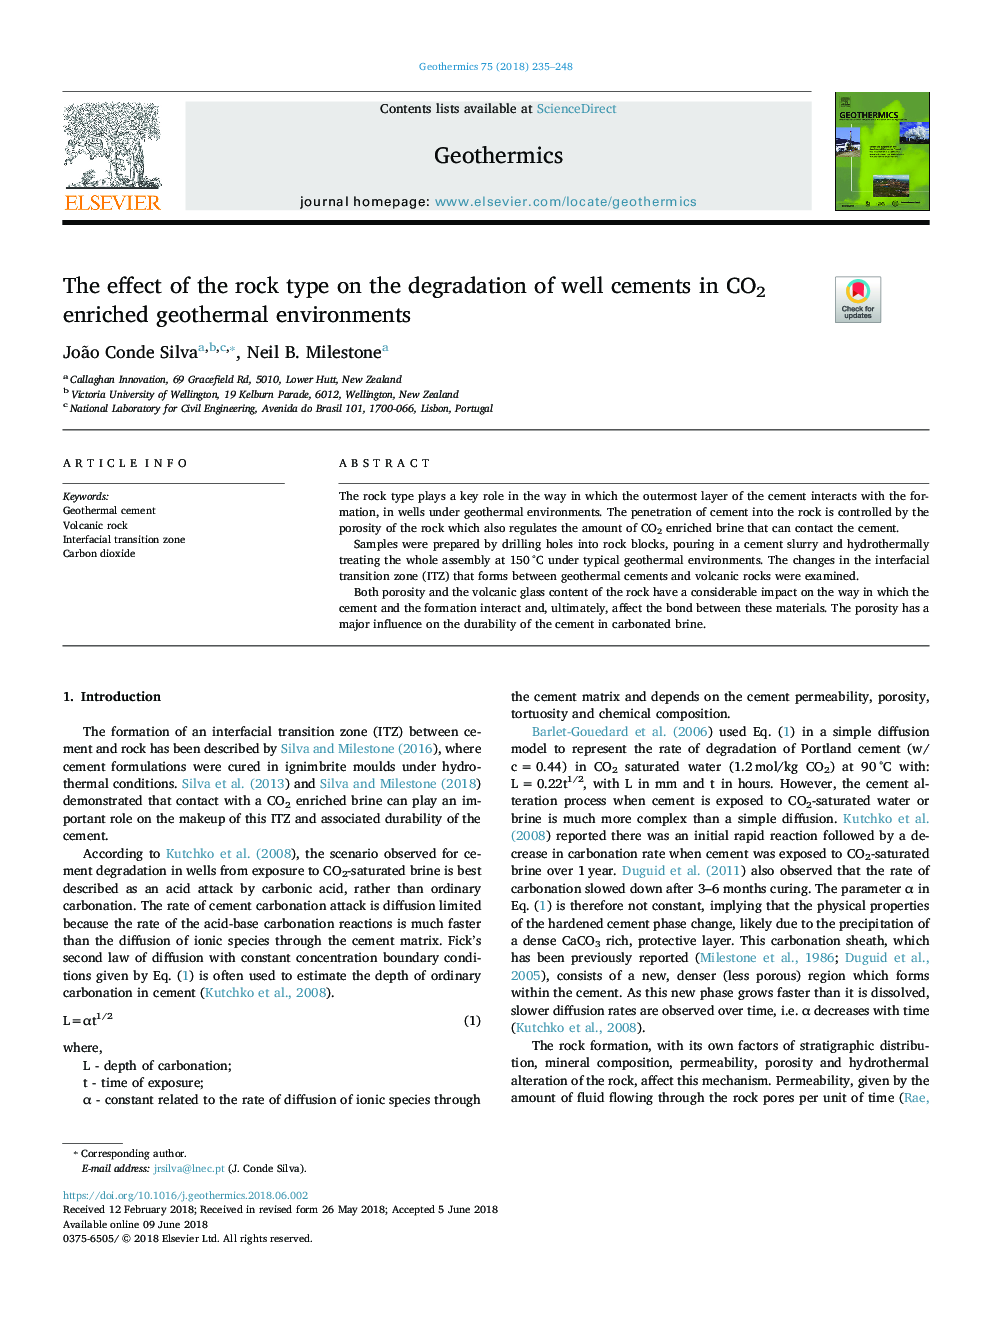 The effect of the rock type on the degradation of well cements in CO2 enriched geothermal environments